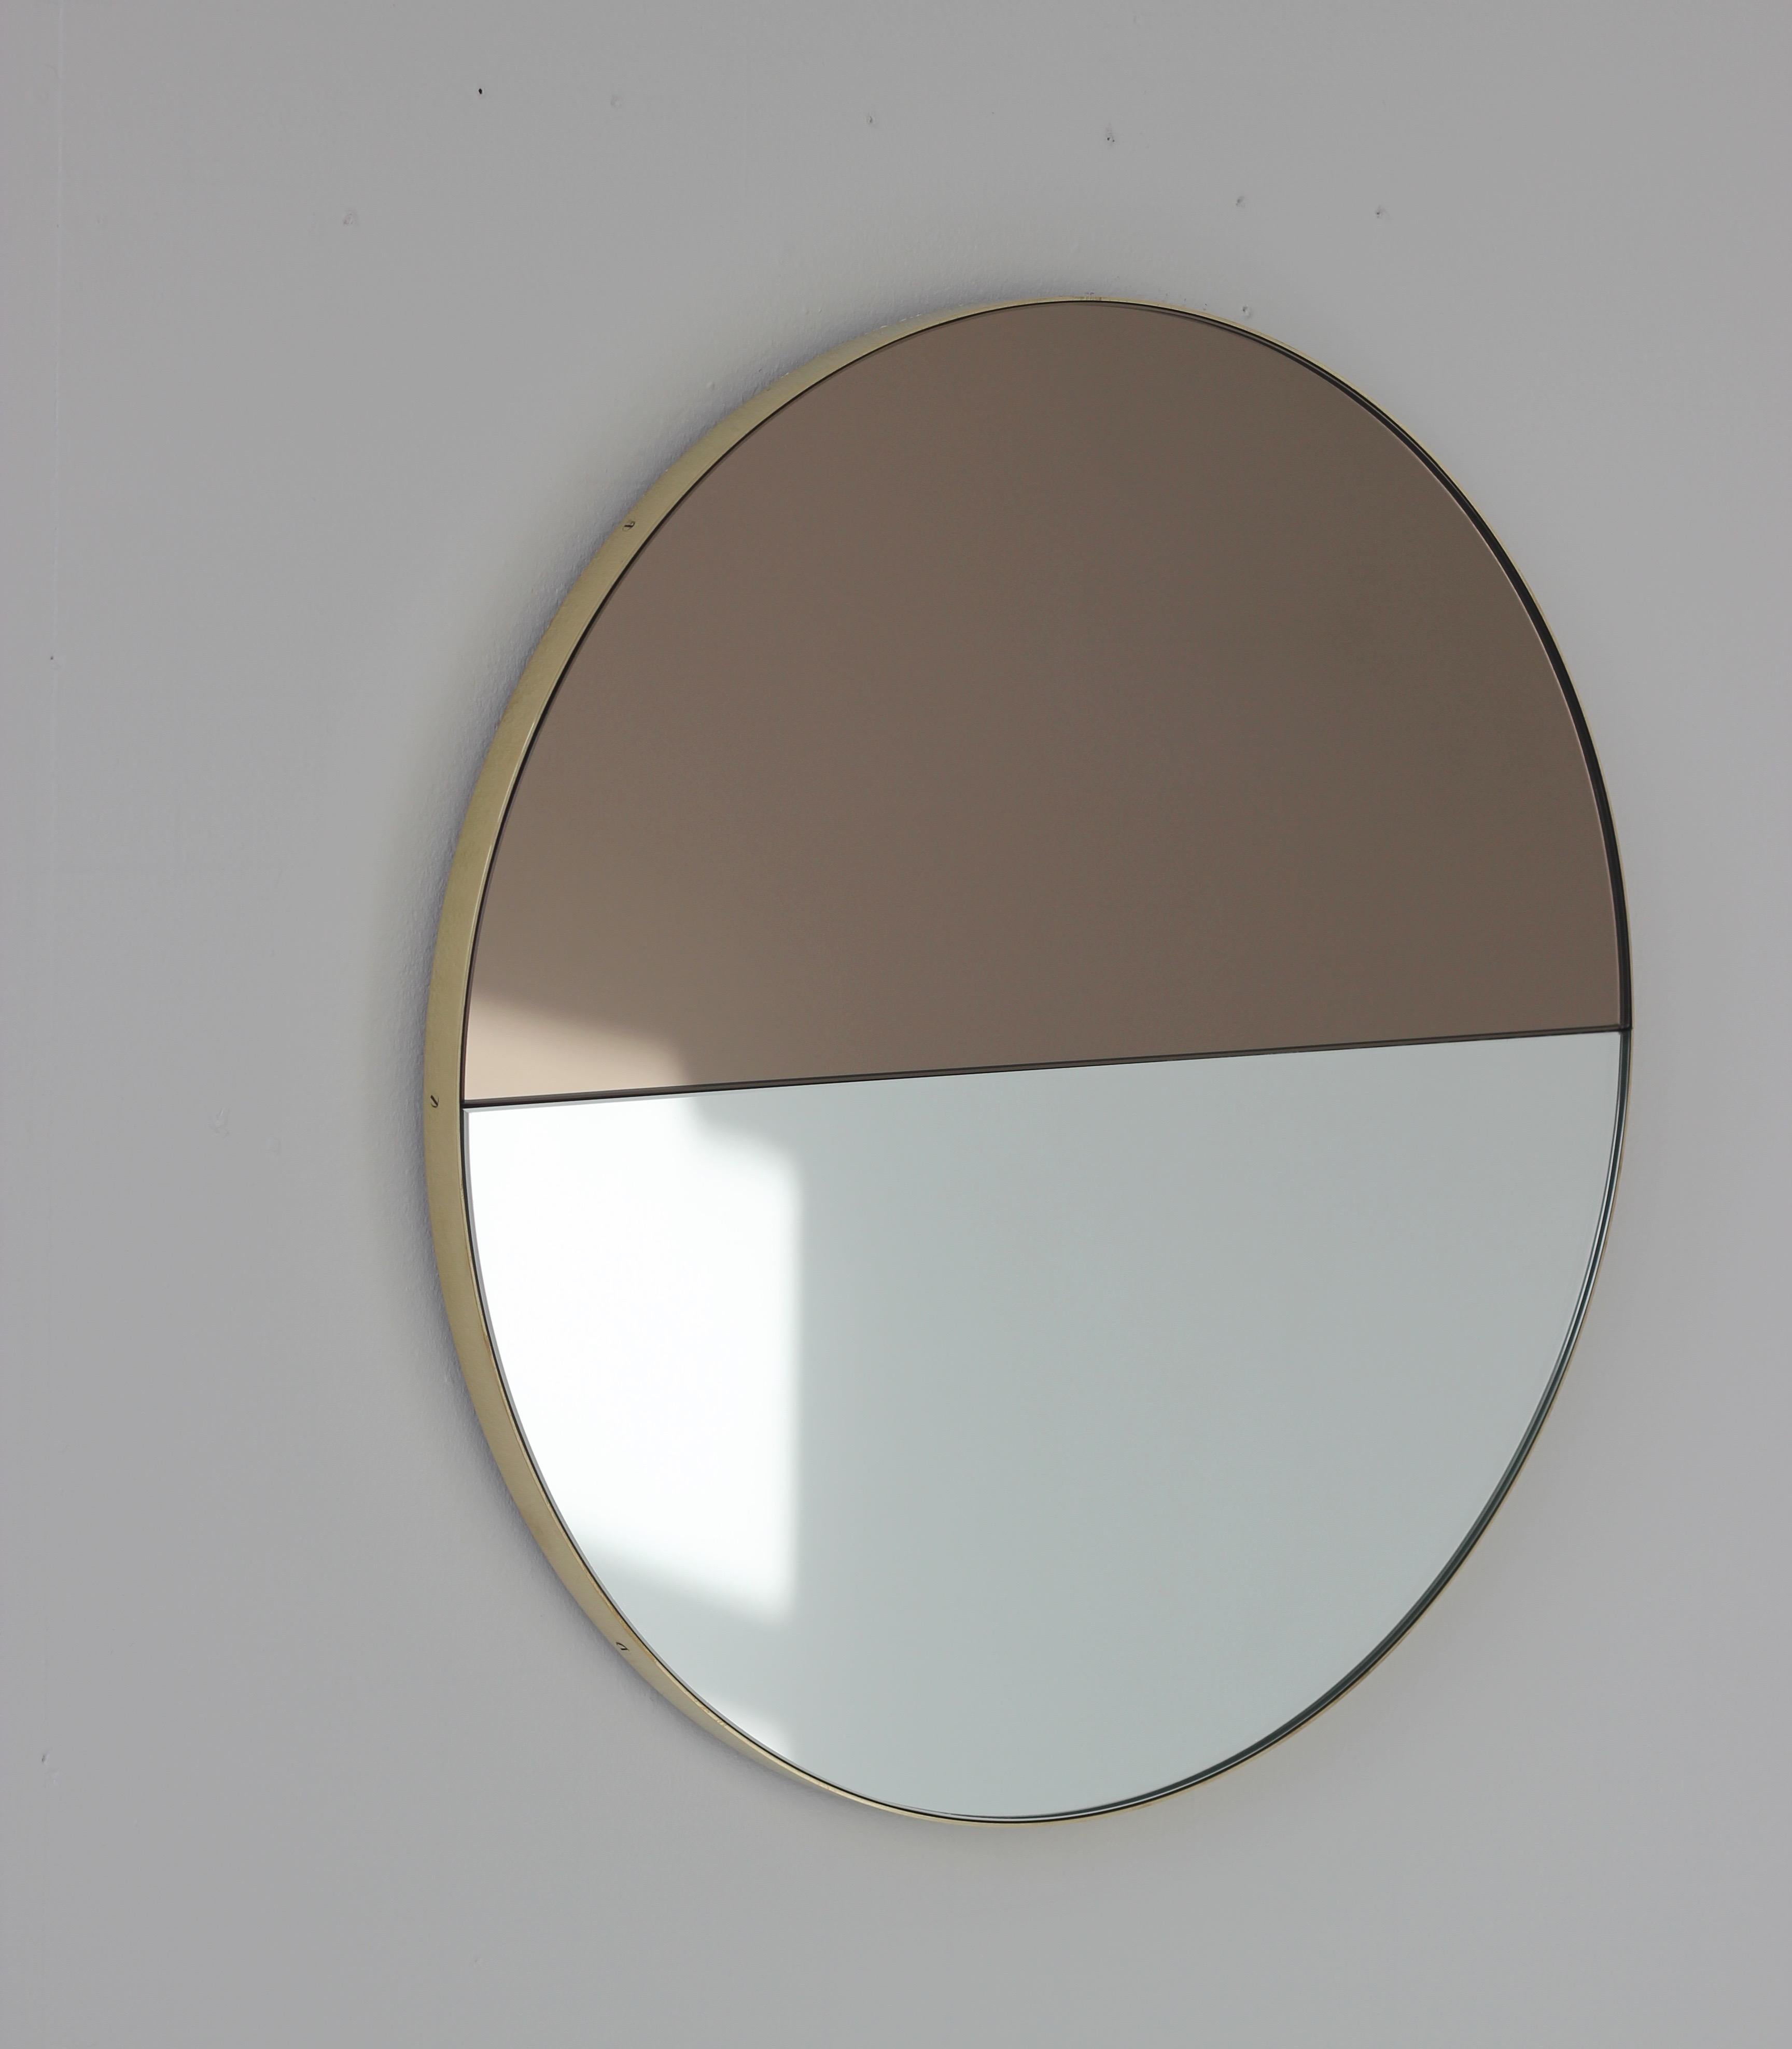 Contemporary Orbis Dualis Mixed Silver + Bronze Round Mirror with Brass Frame, Medium For Sale